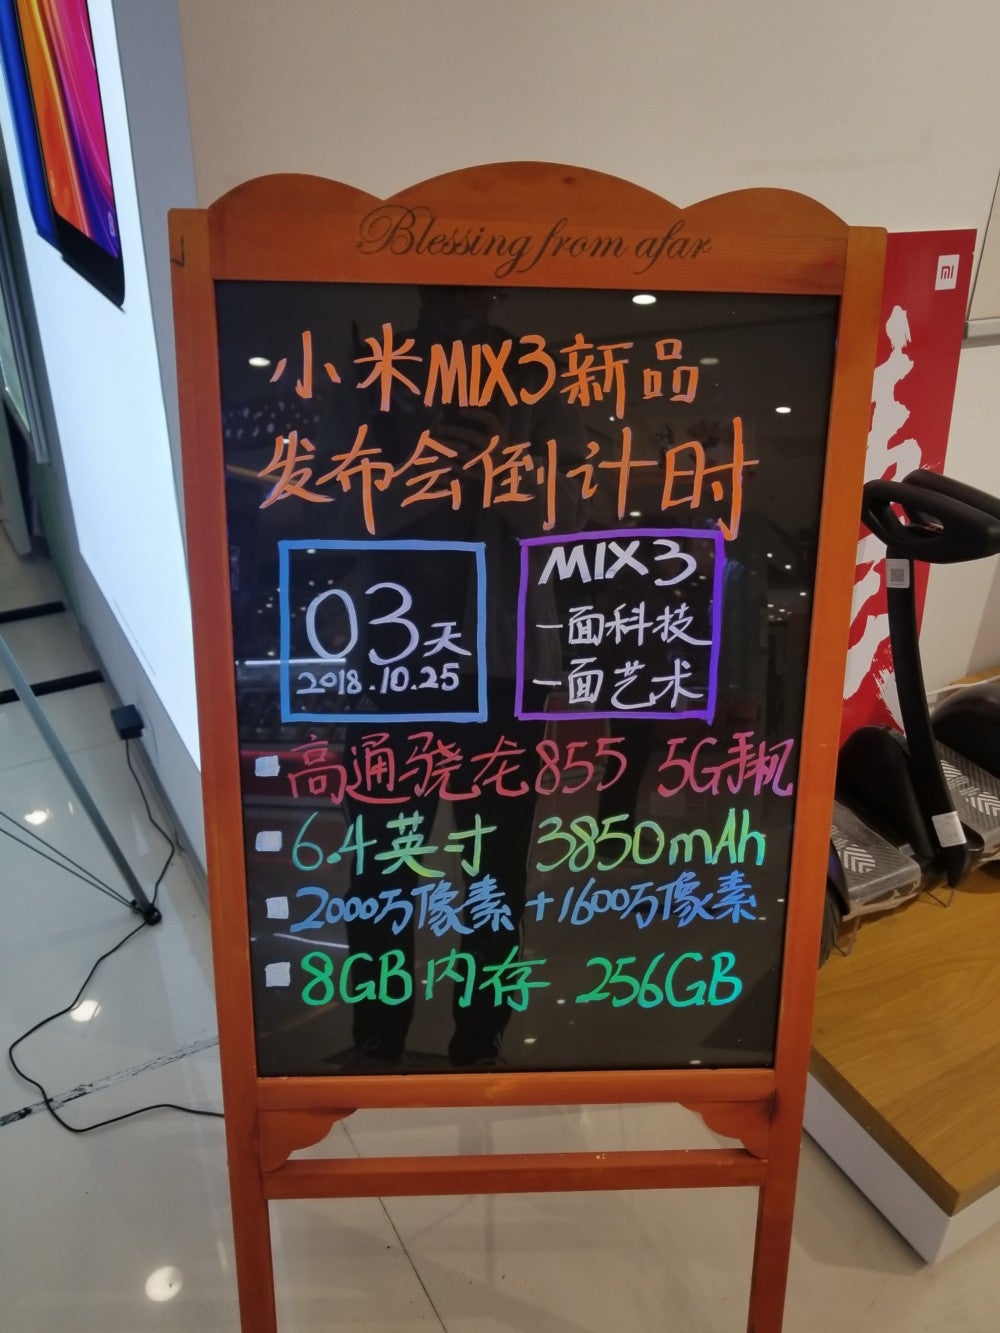 Snapdragon 855 likely won't be on the menu - Mi Mix 3 benchmark nips the Snapdragon 855 rumor, but green and 'Forbidden City' versions are in store